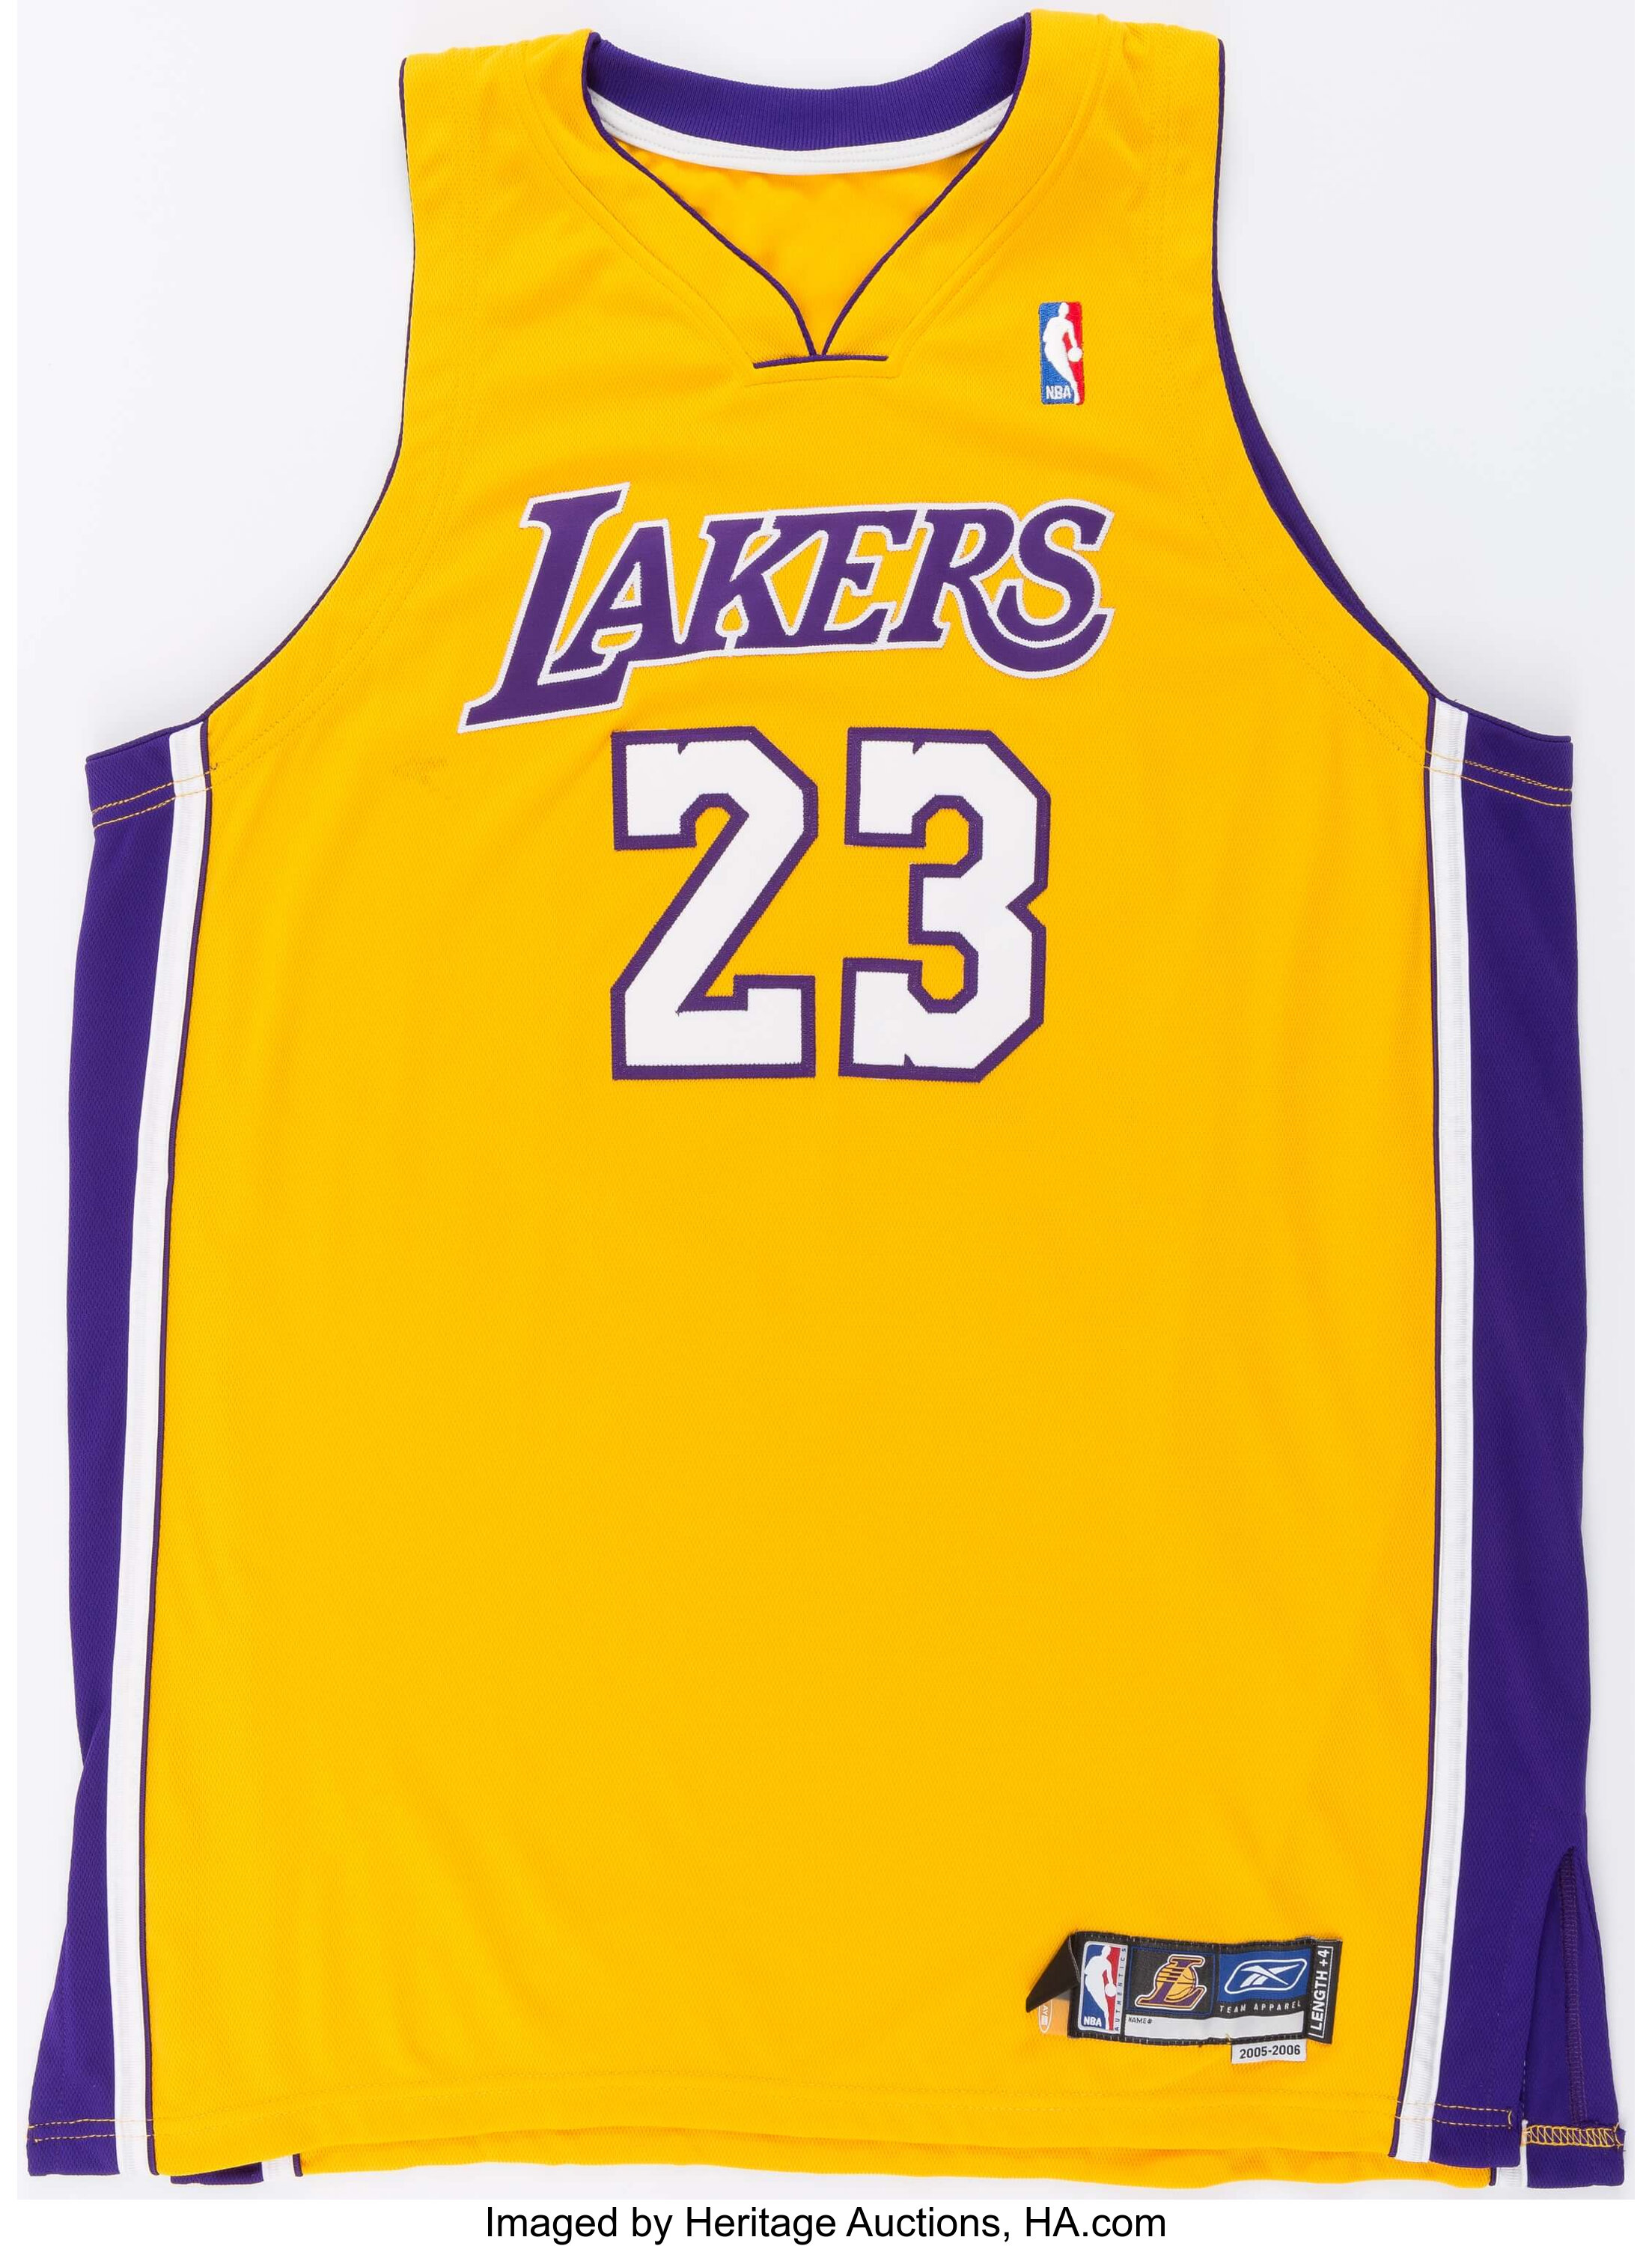 2005-06 Von Wafer Game Worn Los Angeles Lakers Jersey., Lot #44179